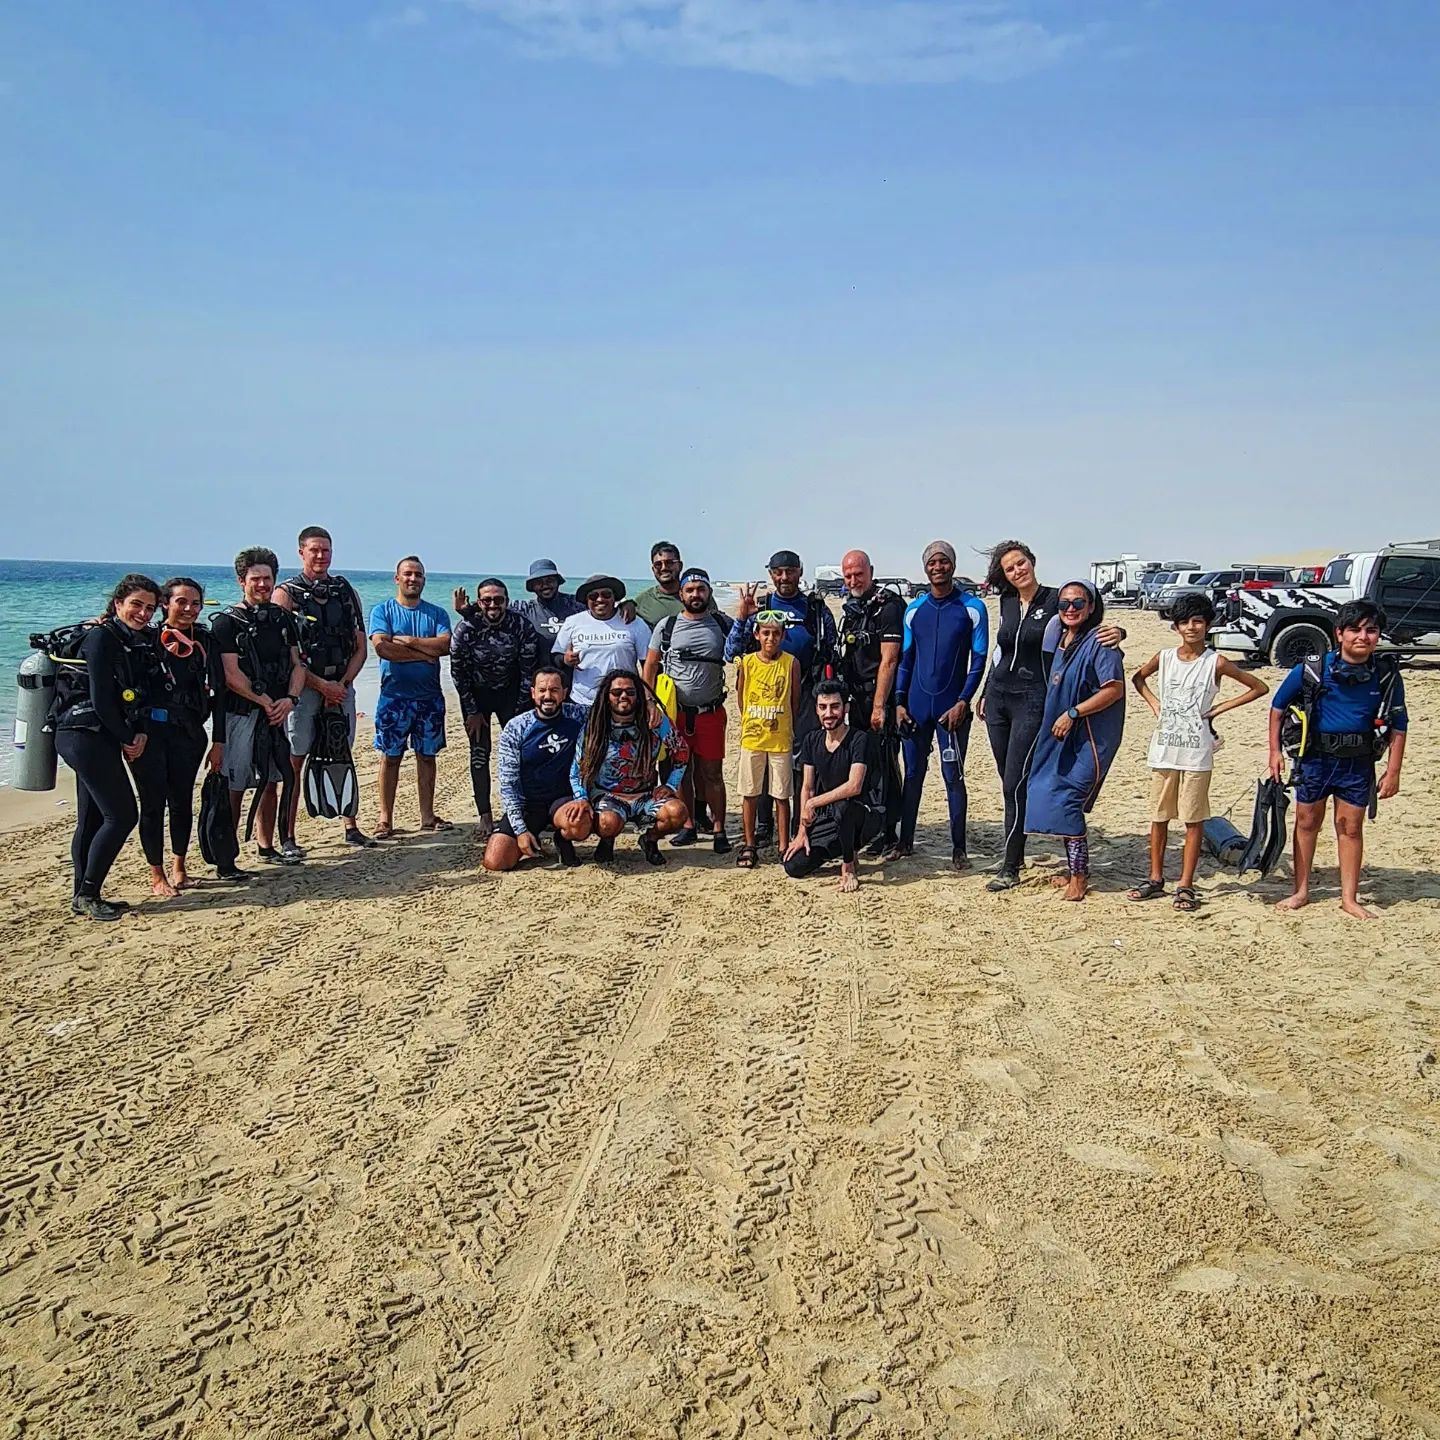 From one weekend to another we wait to see our dive family 🤩
#divinginqatar #scubadiving #diving #scuba